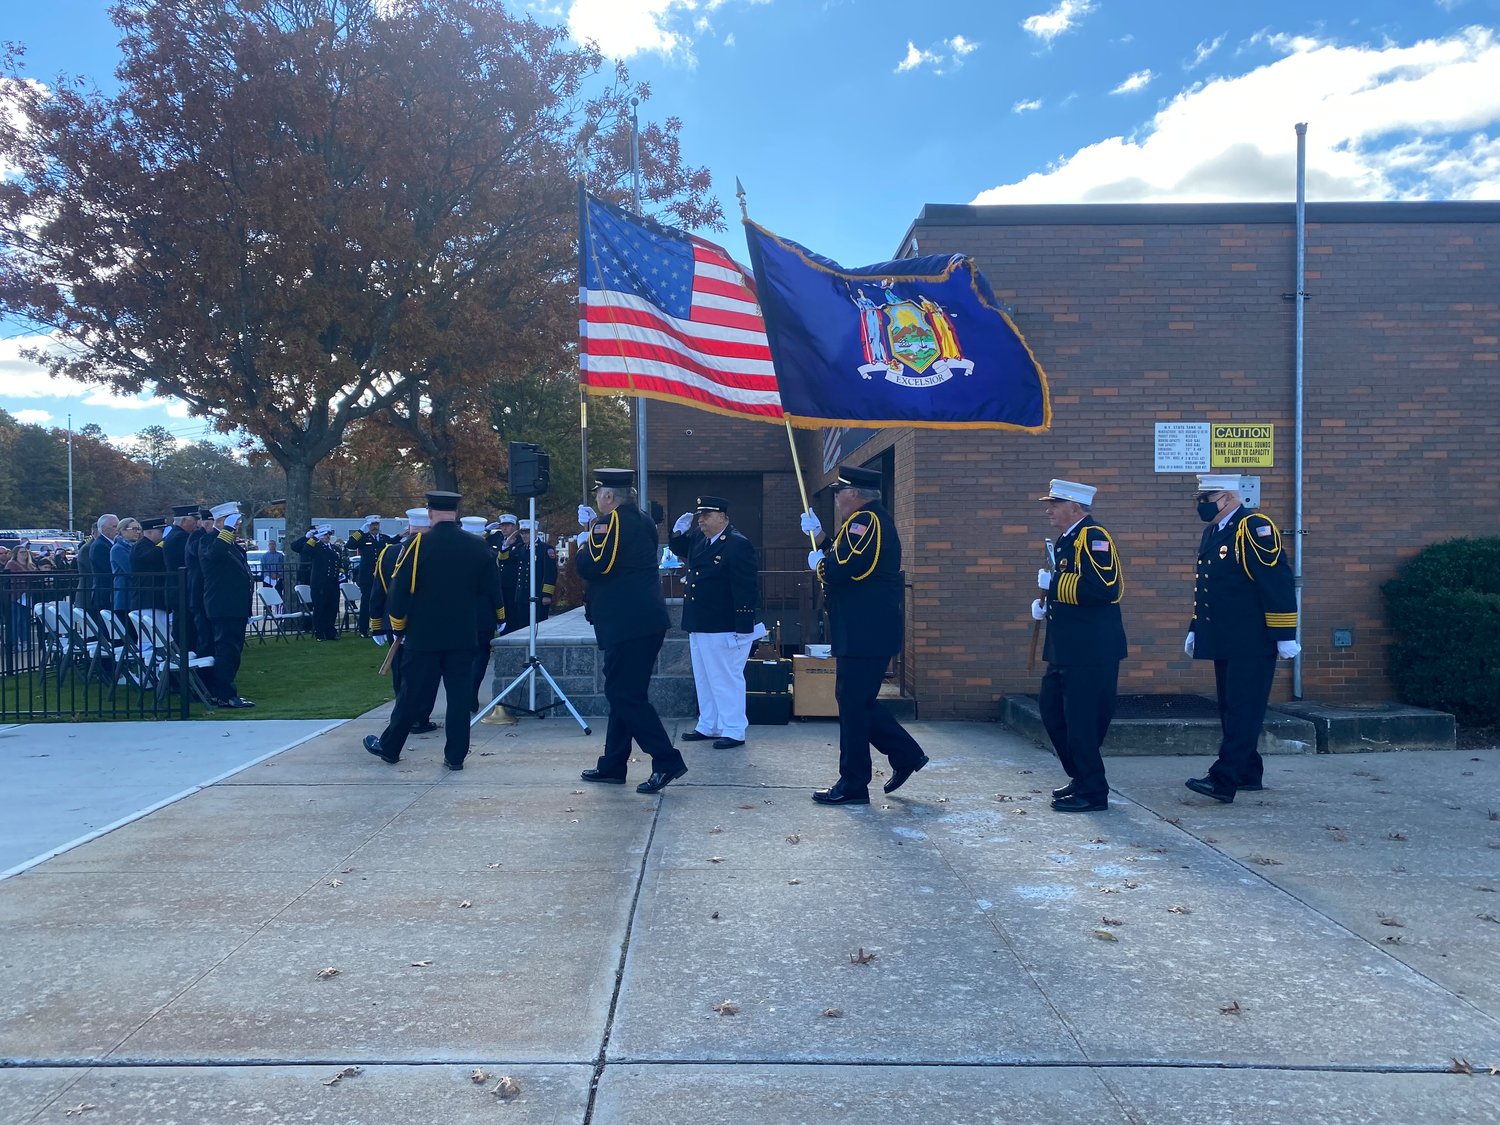 The Fire Chiefs Council of Suffolk County’s ceremonial detail unit performed the presentation of colors.